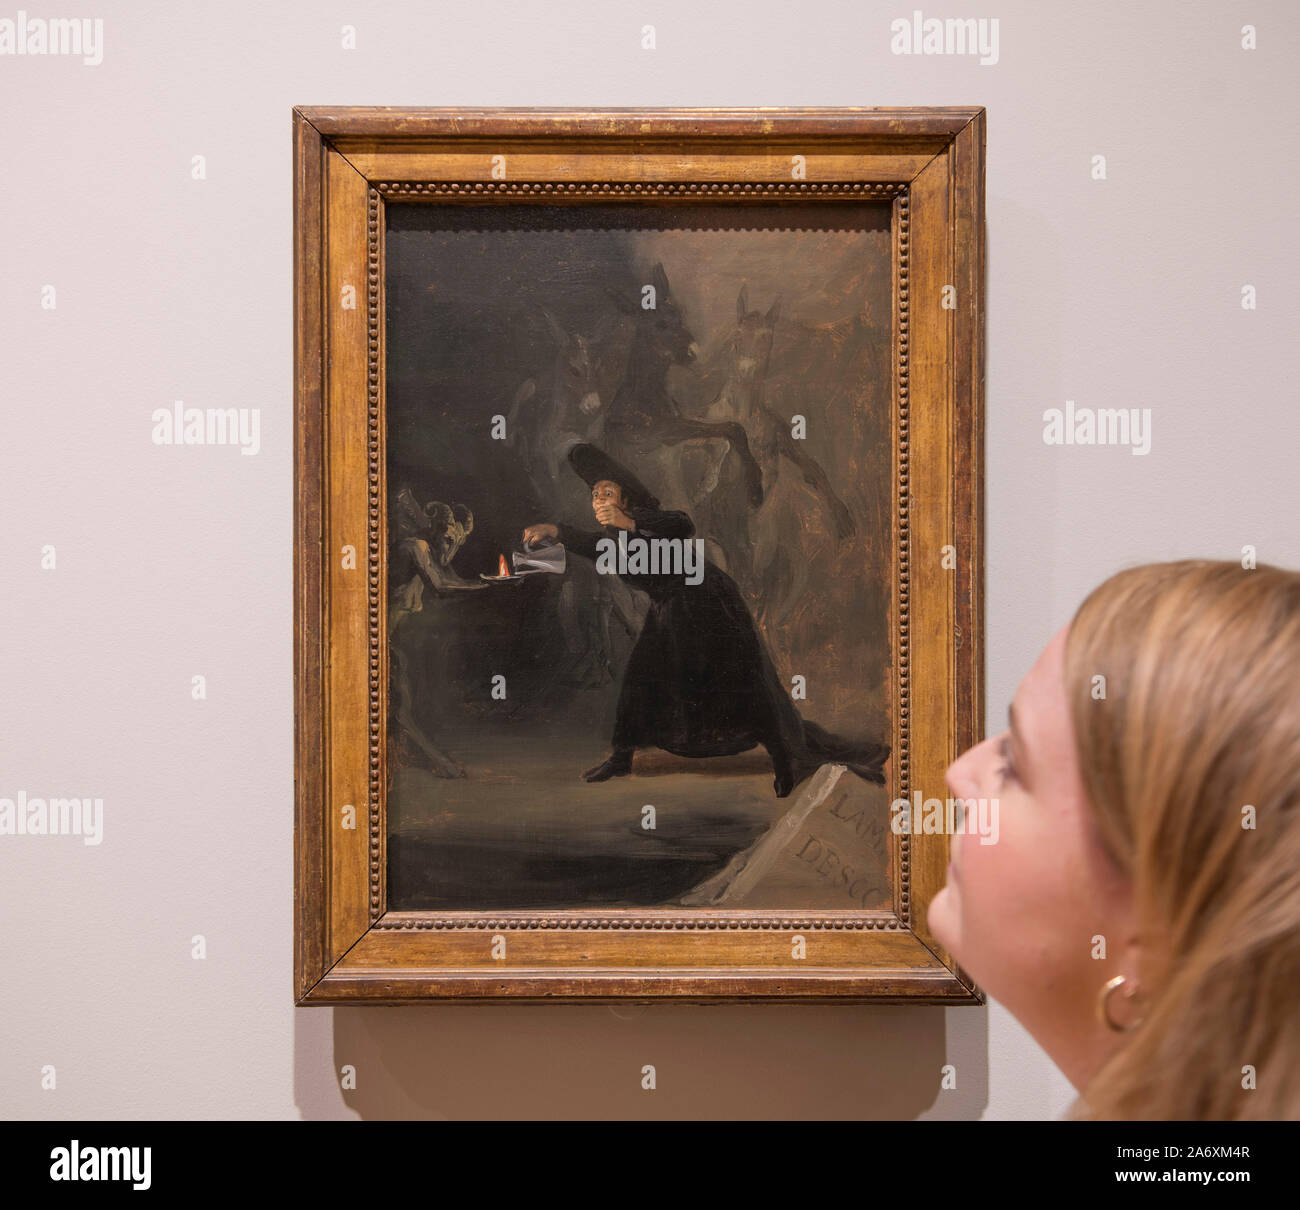 National Gallery, London, UK. 17th October 2019.  Photo embargoed until 29th October 2019. The National Gallery choose two pictures with a spooky horror Halloween theme for the 31st October, posed with members of staff. Image: A Scene from ‘The Forcibly Bewitched’. Francisco de Goya, 1798. The National Gallery, London. Credit: Malcolm Park/Alamy Live News. Stock Photo